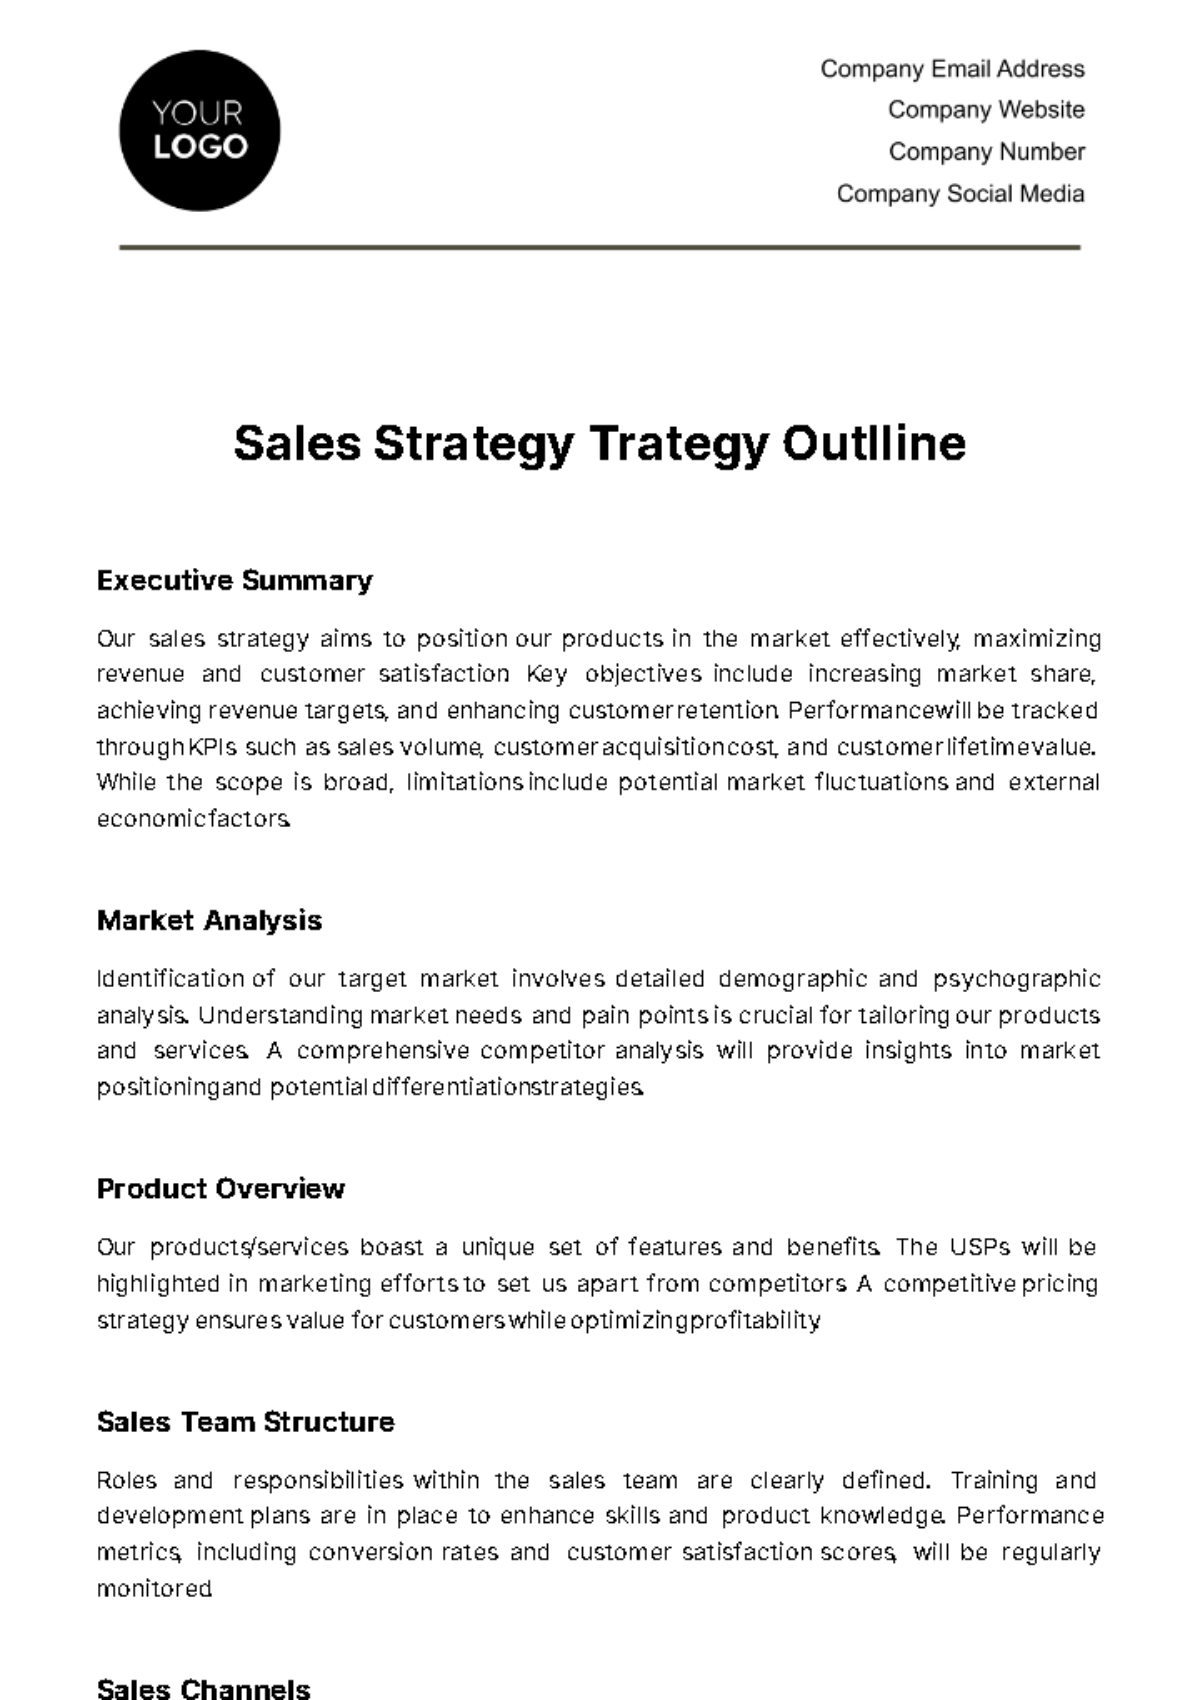 Sales Strategy Outline Template